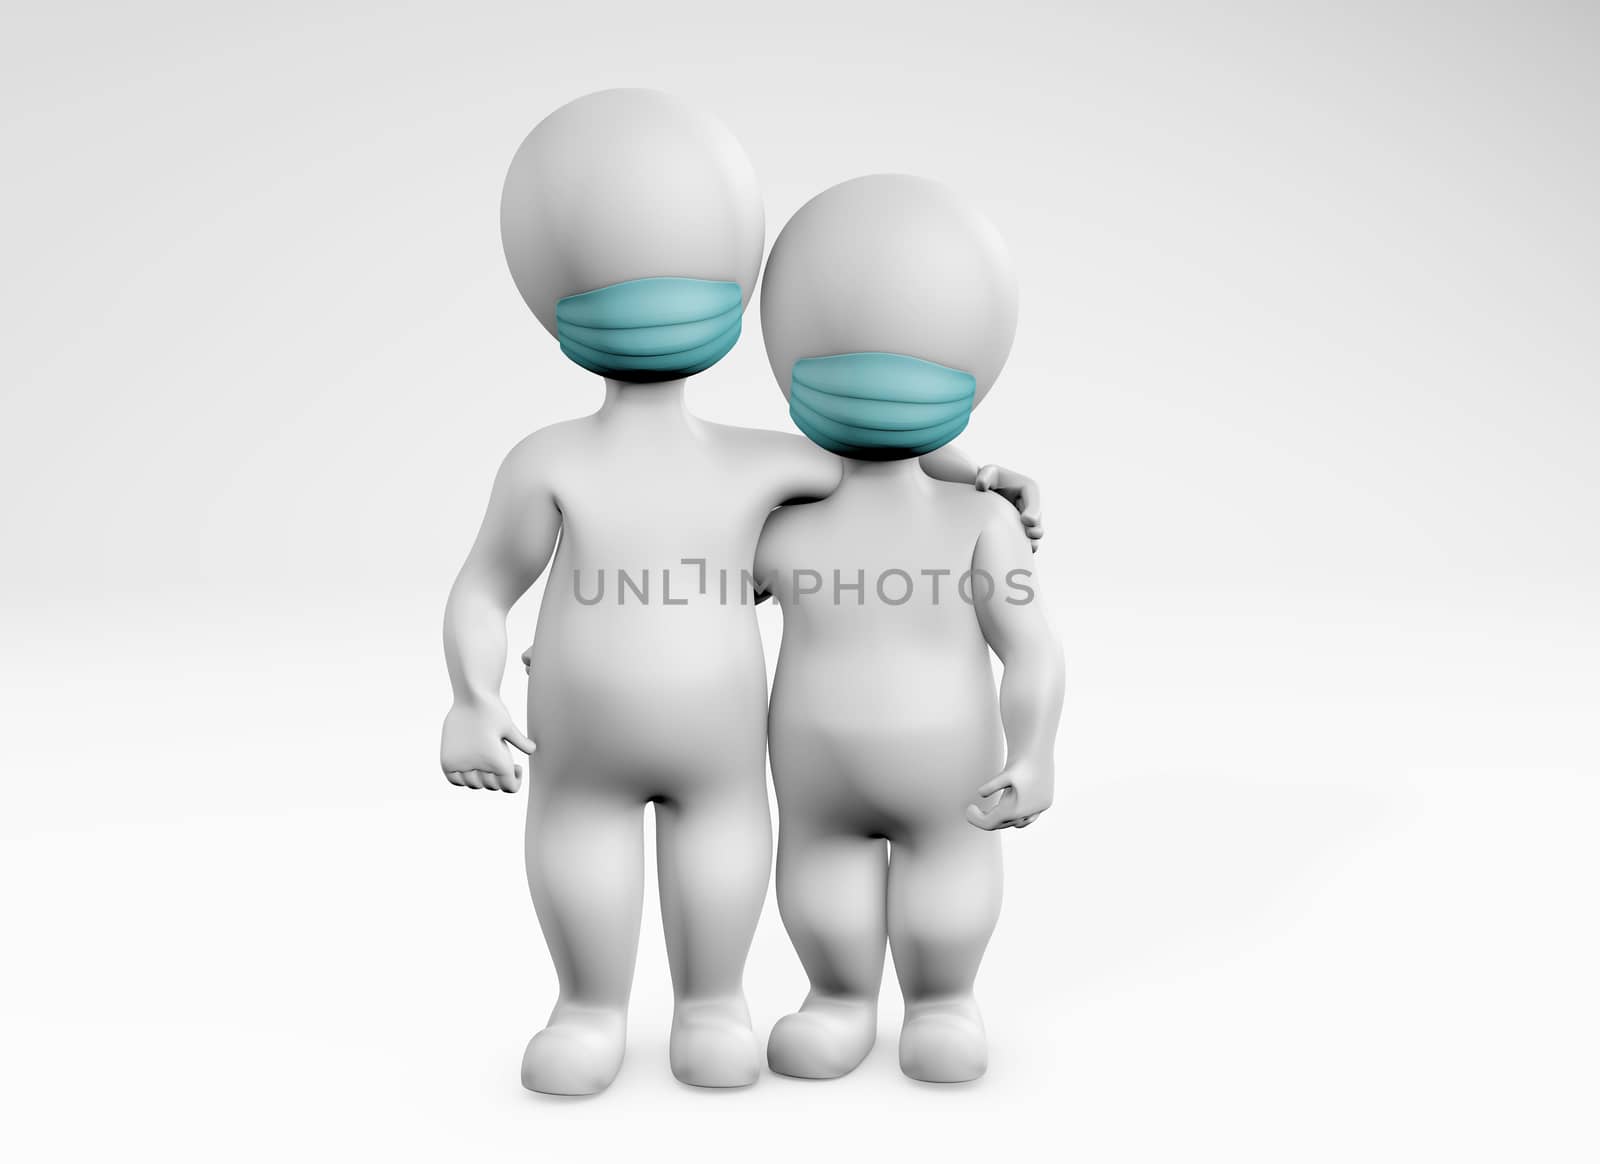 fatty family in quarantine holding together 3d rendering by F1b0nacci